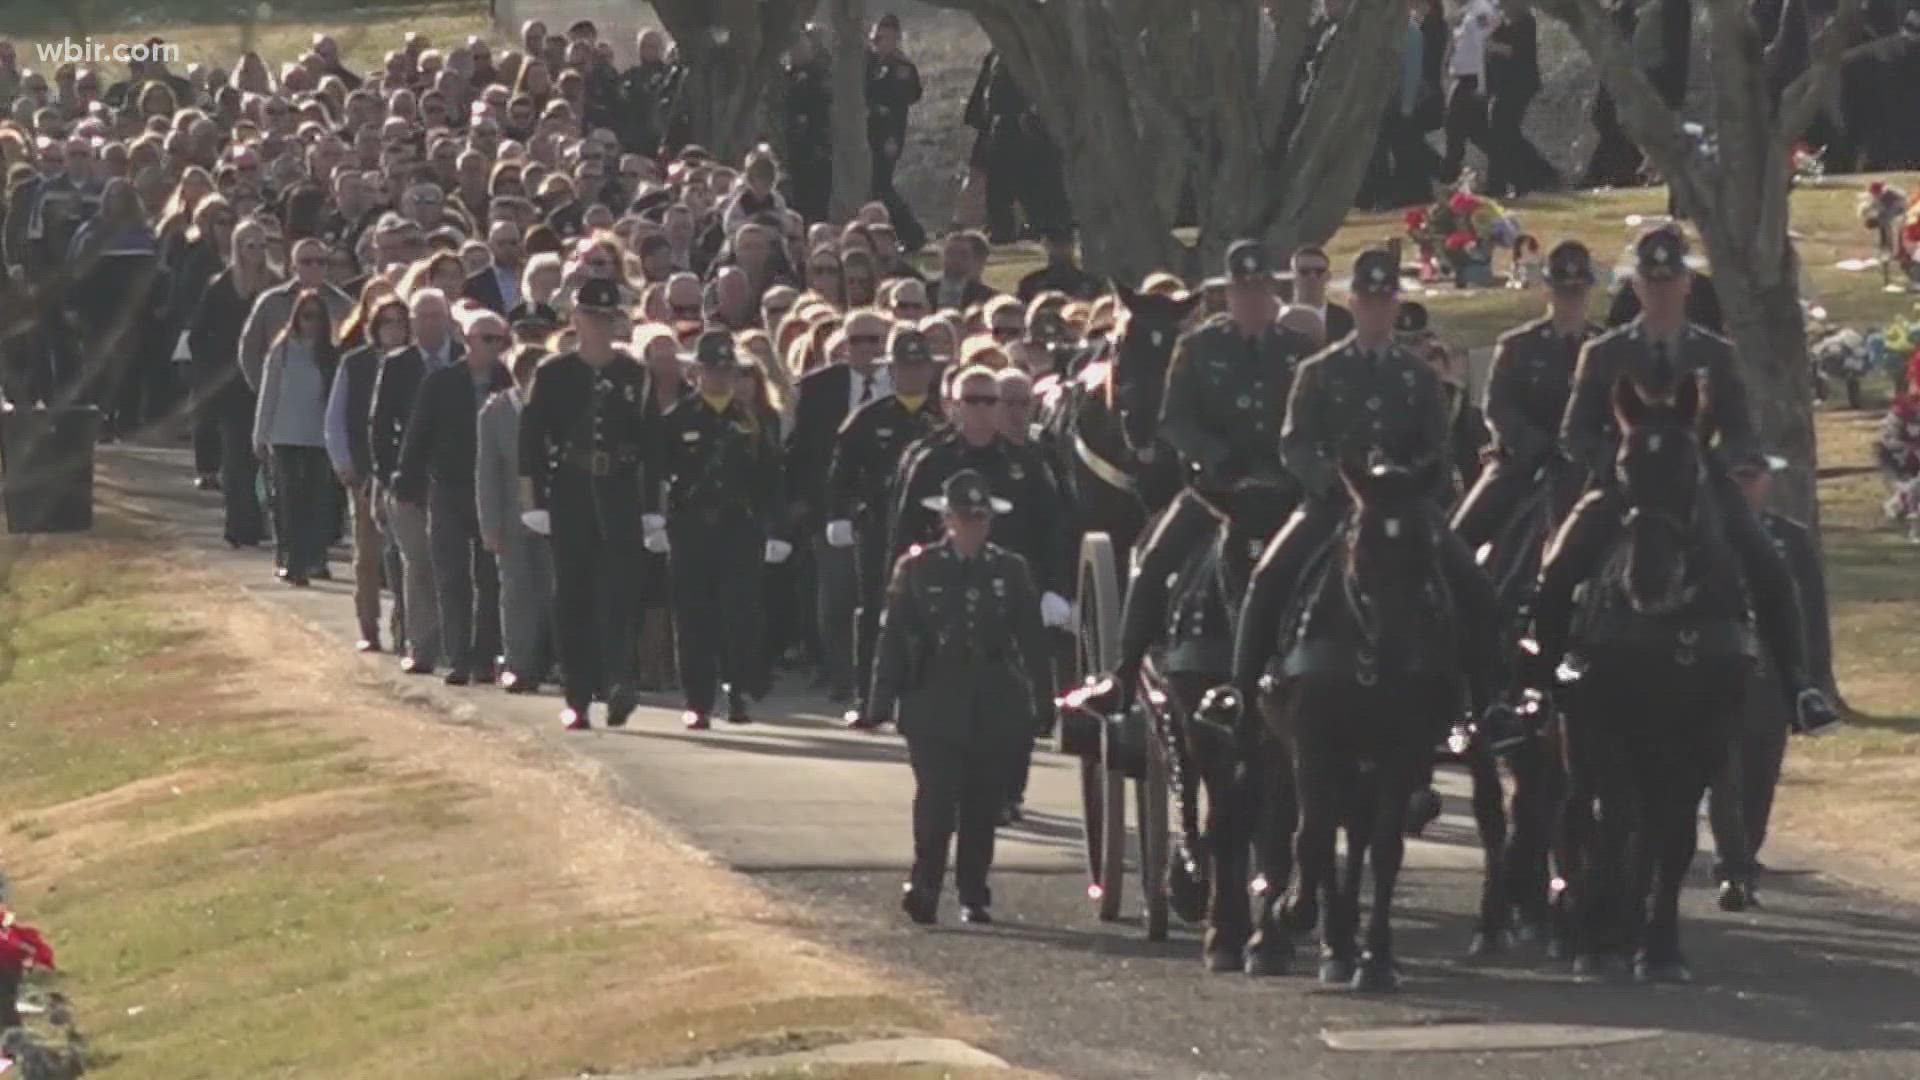 Hundreds gathered in Loudon County Wednesday to celebrate the life of a deputy who died in the line of duty.